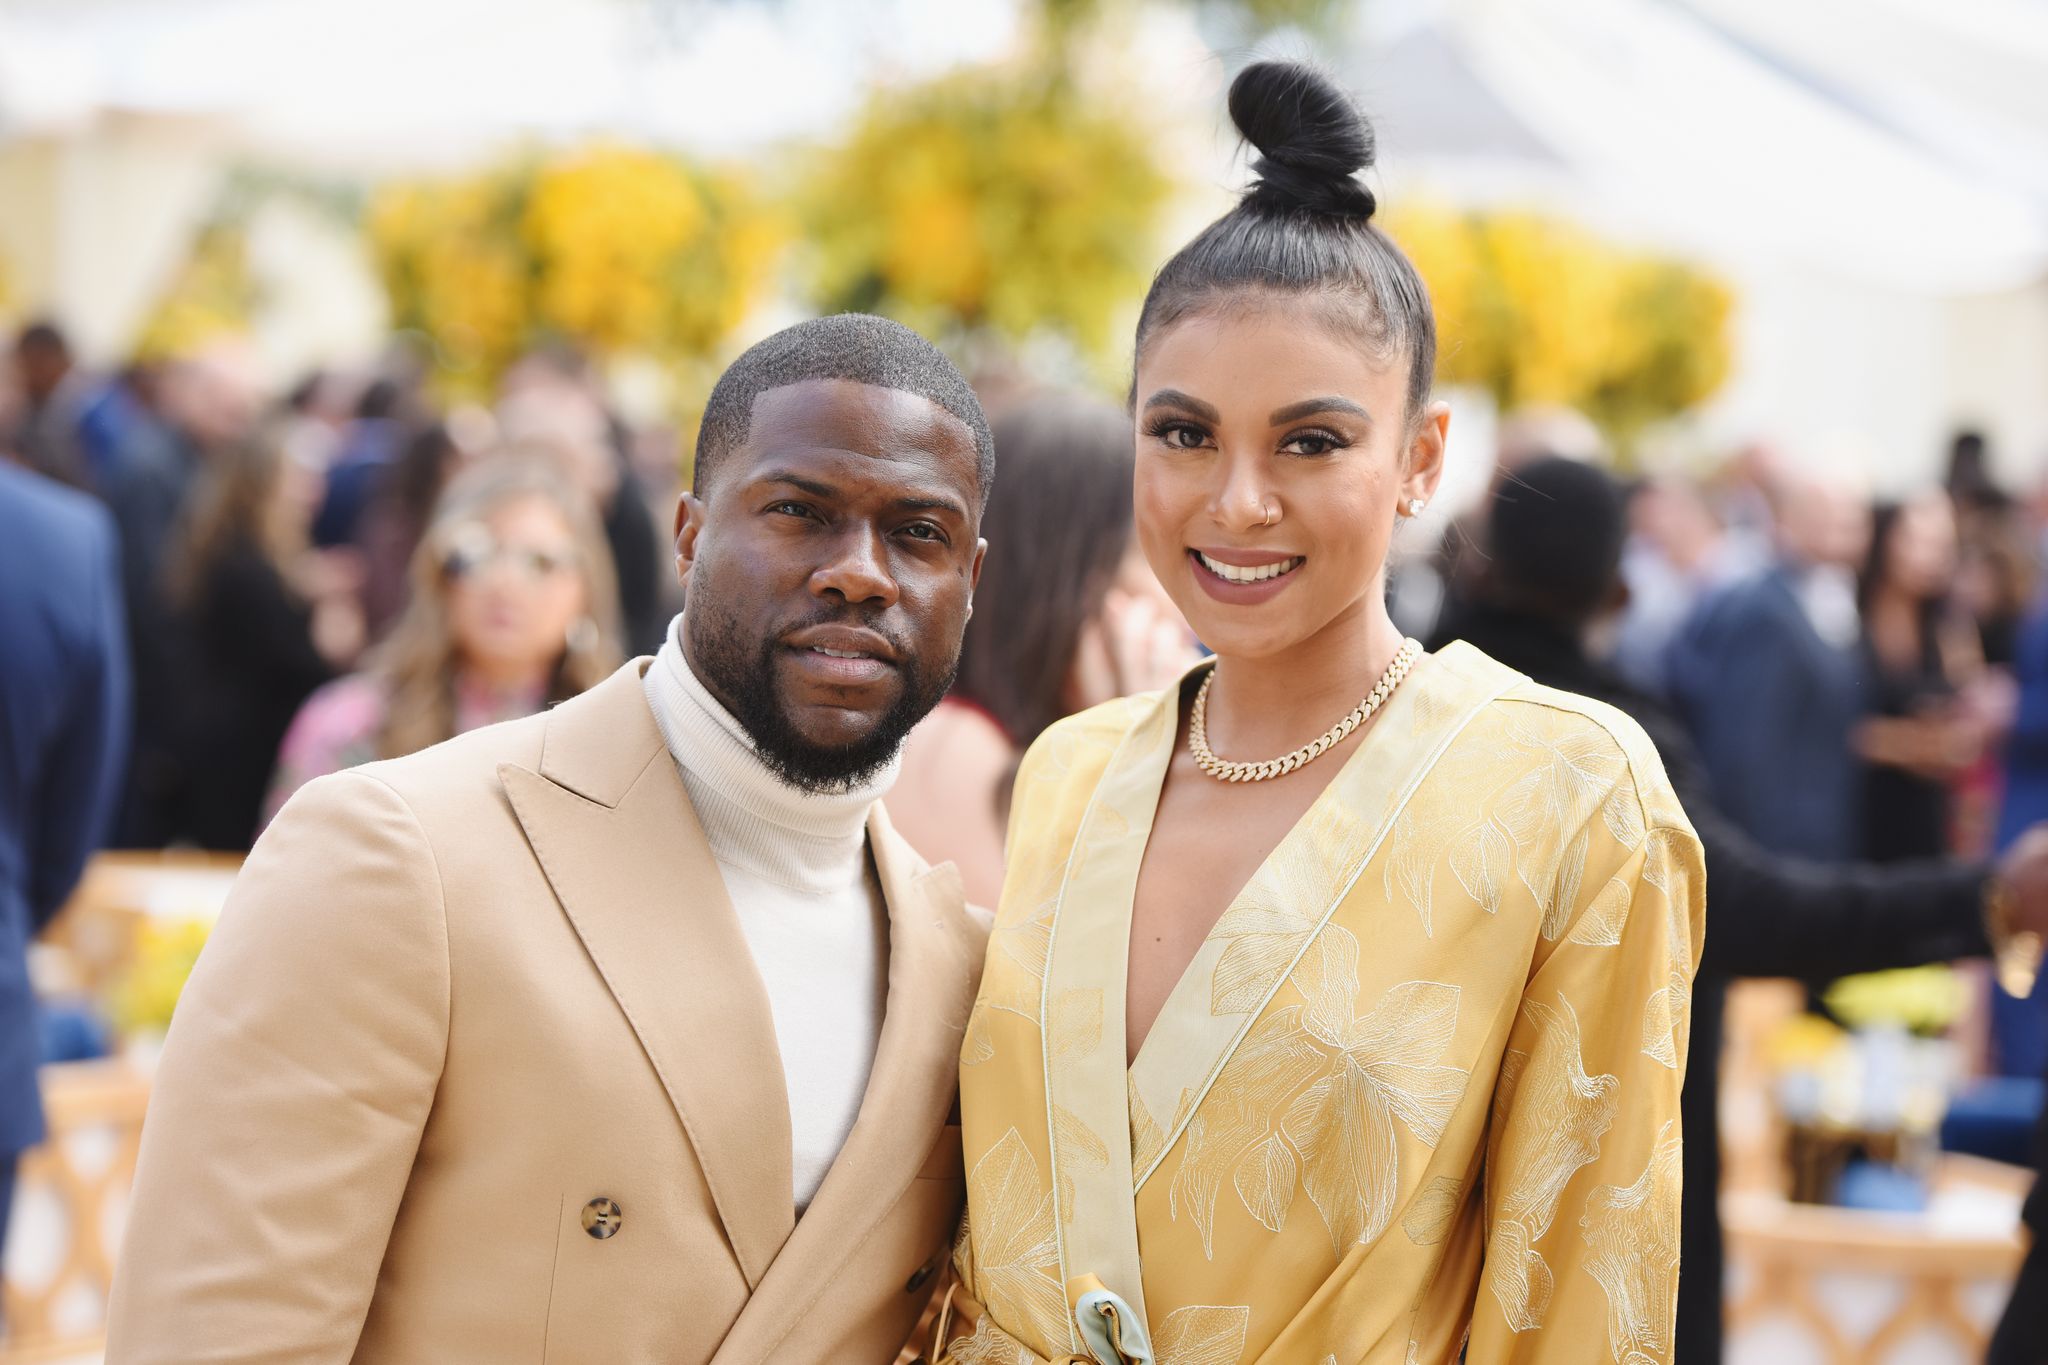 Kevin Hart and Eniko at Roc Nation on February 9, 2019 in Los Angeles. | Photo: Getty Images